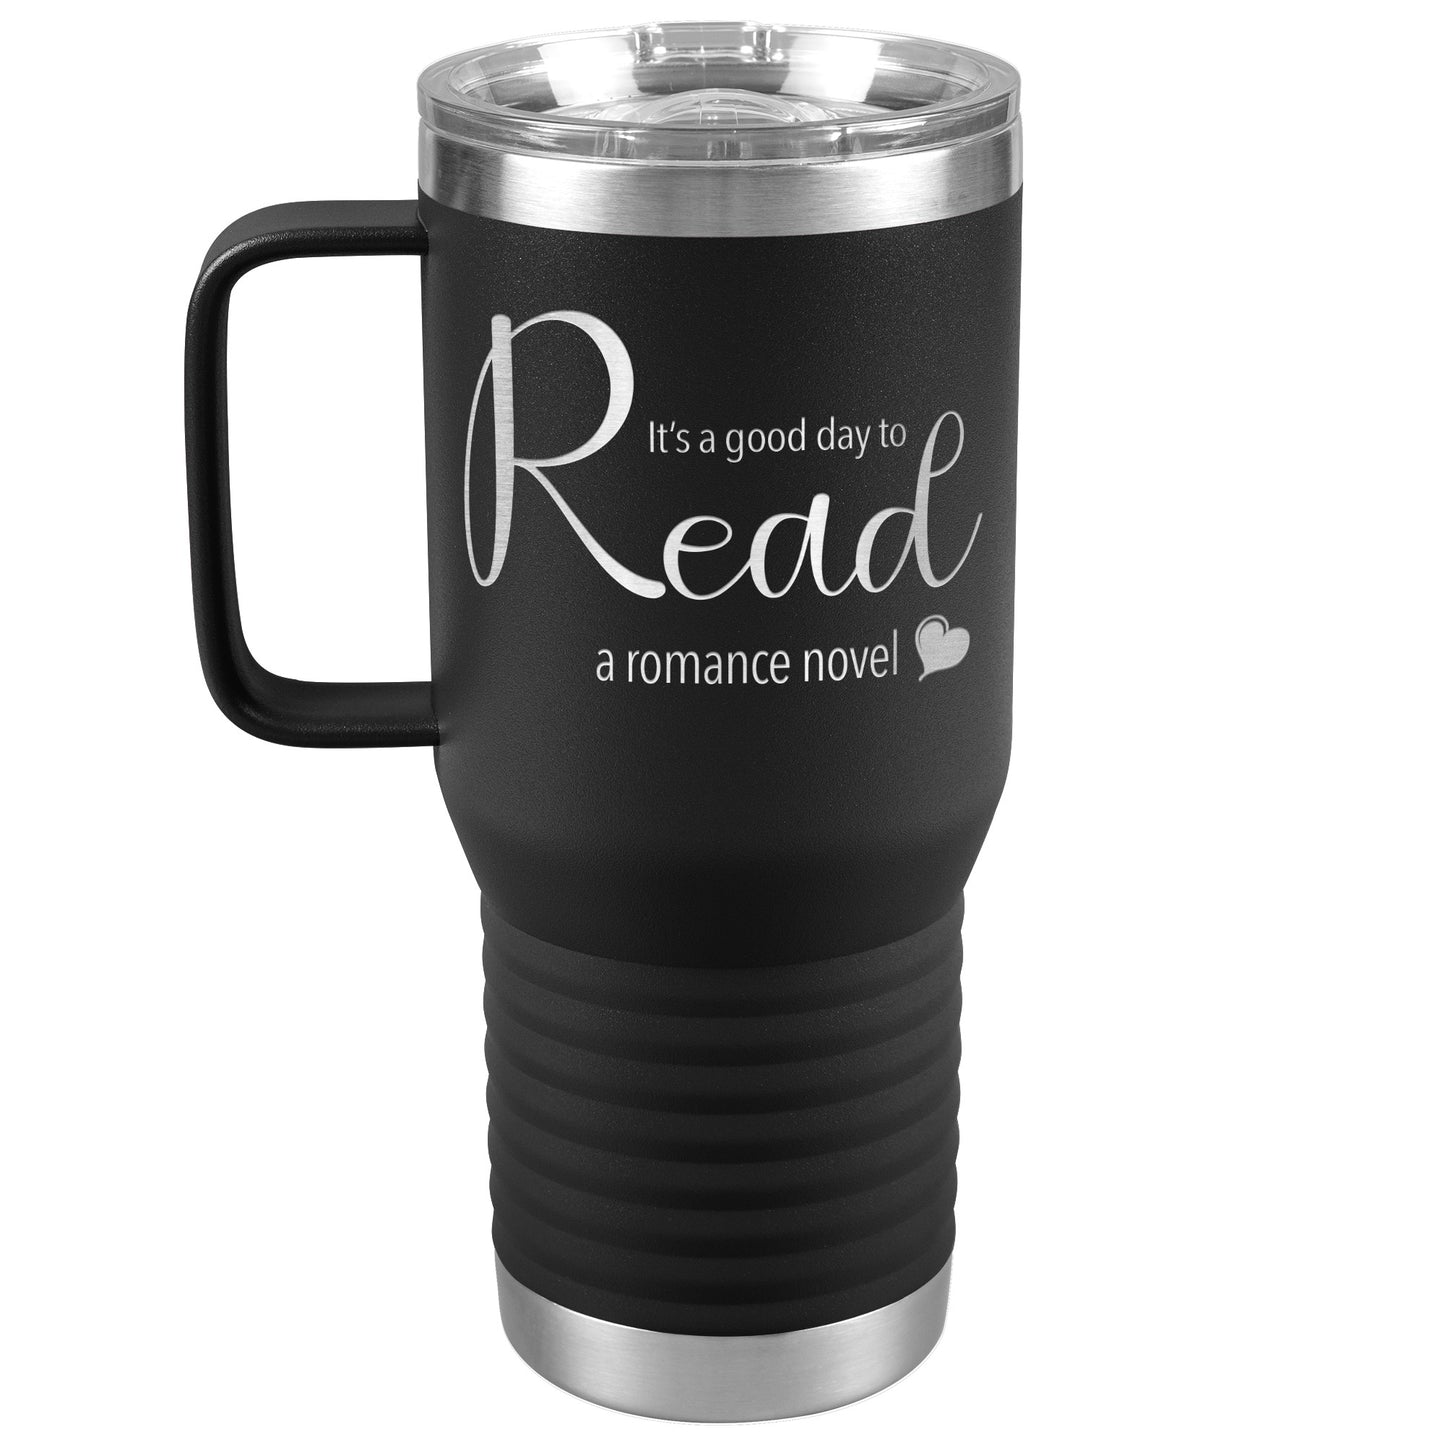 A good day to read - Travel Tumbler